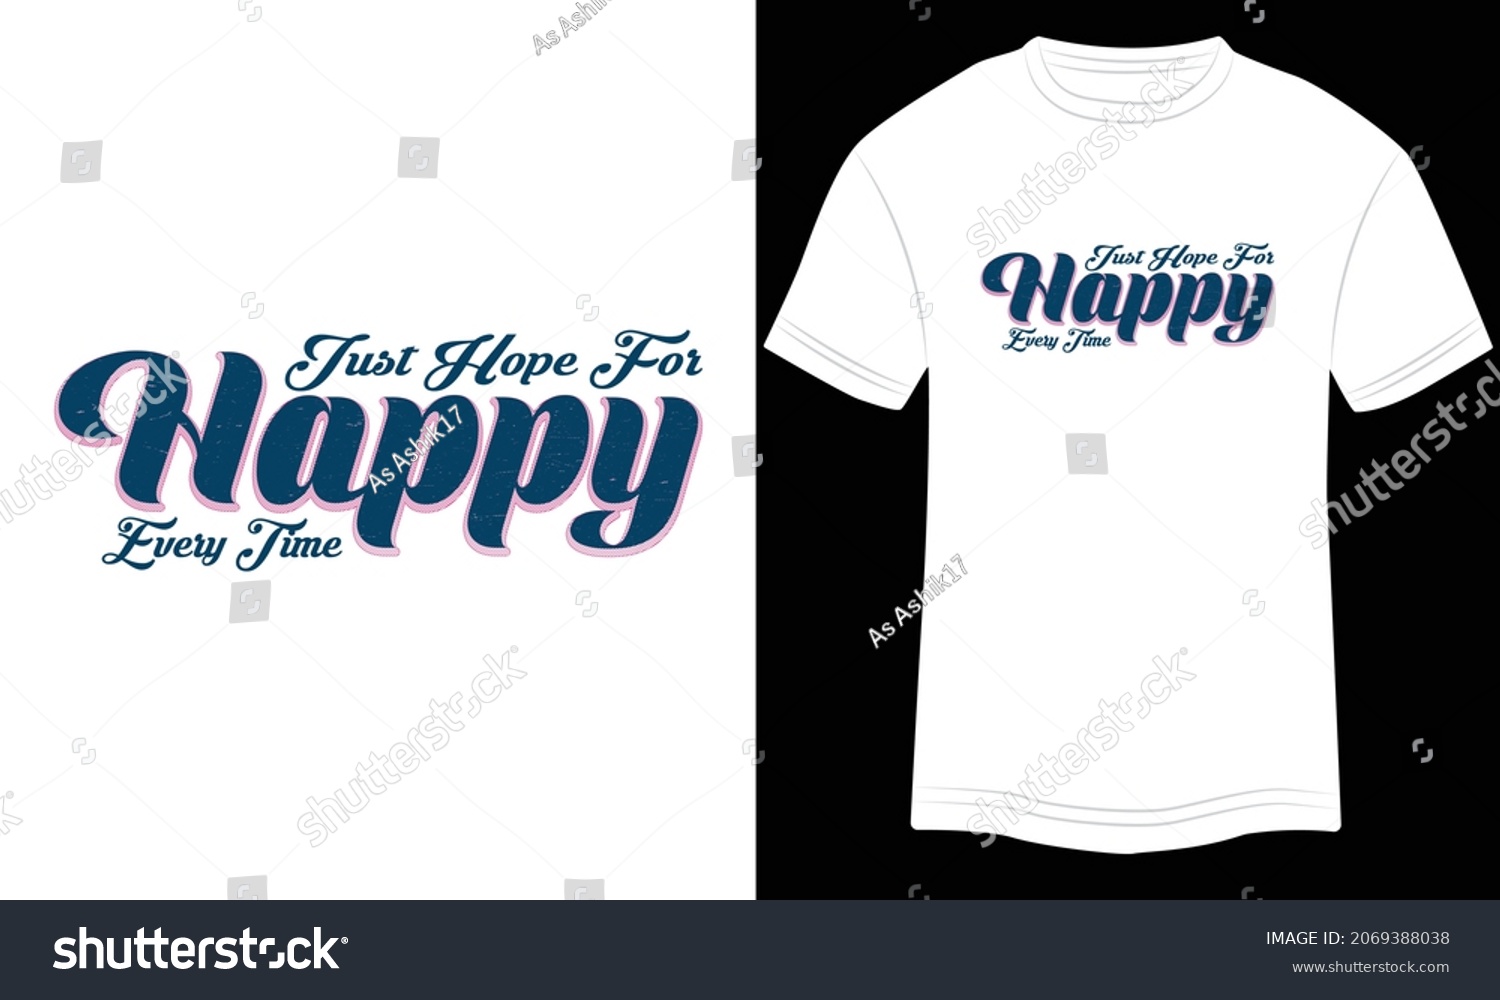 SVG of Just Hope For Happy Every Time Typography T-shirt graphics, tee print design, vector, slogan. Motivational Text, Quote
Vector illustration design for t-shirt graphics. svg